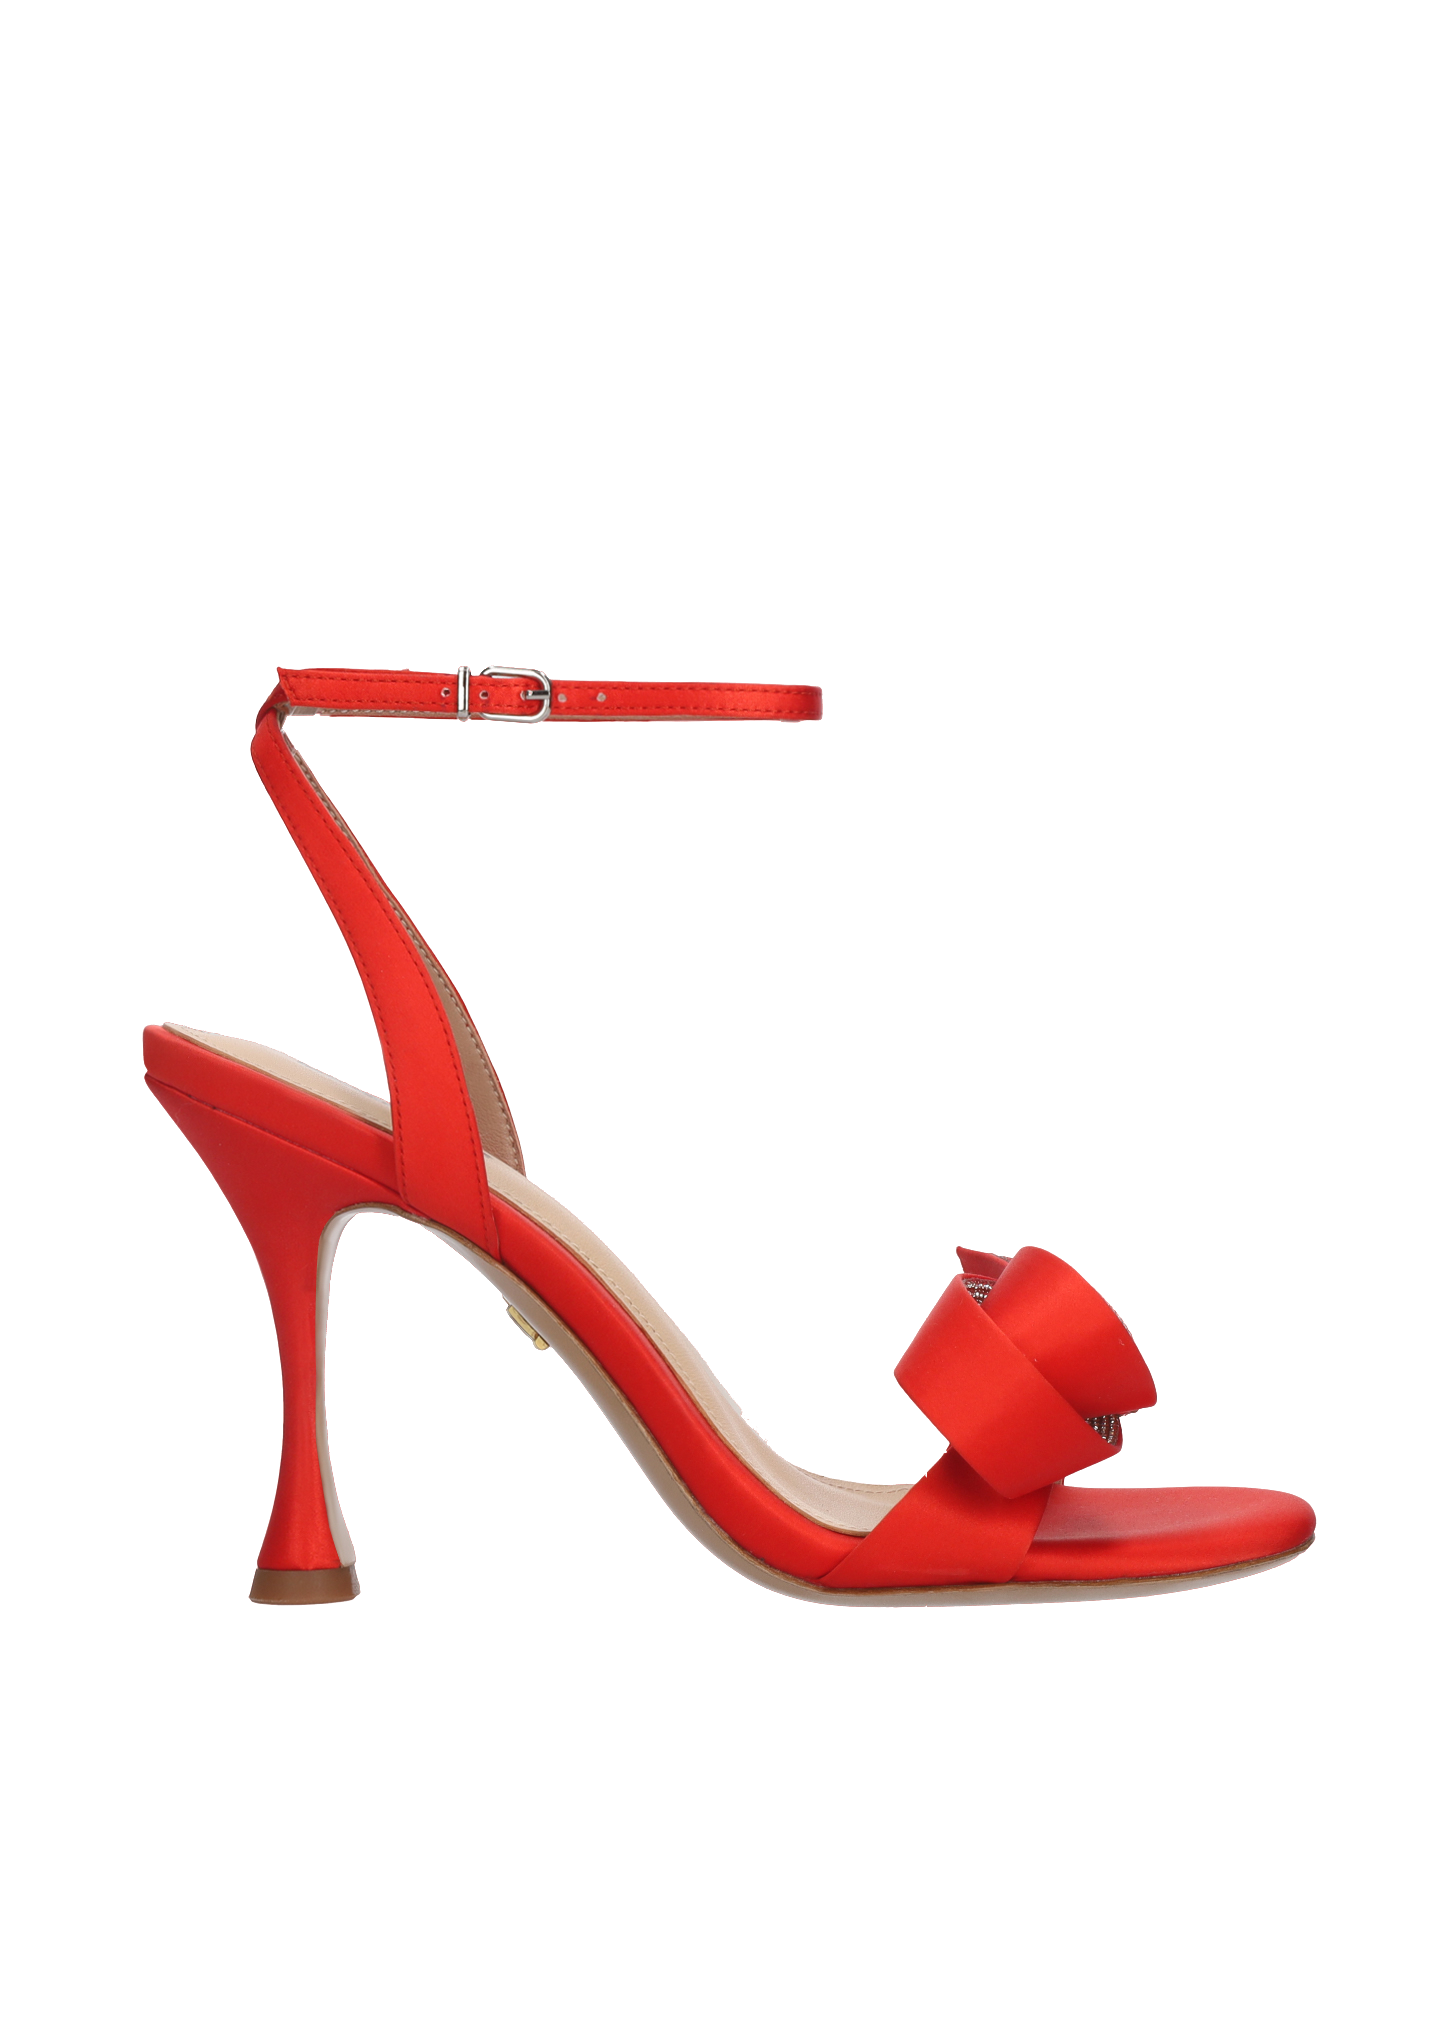 Lola Cruz Shoes Claire Sandal 85 In Red